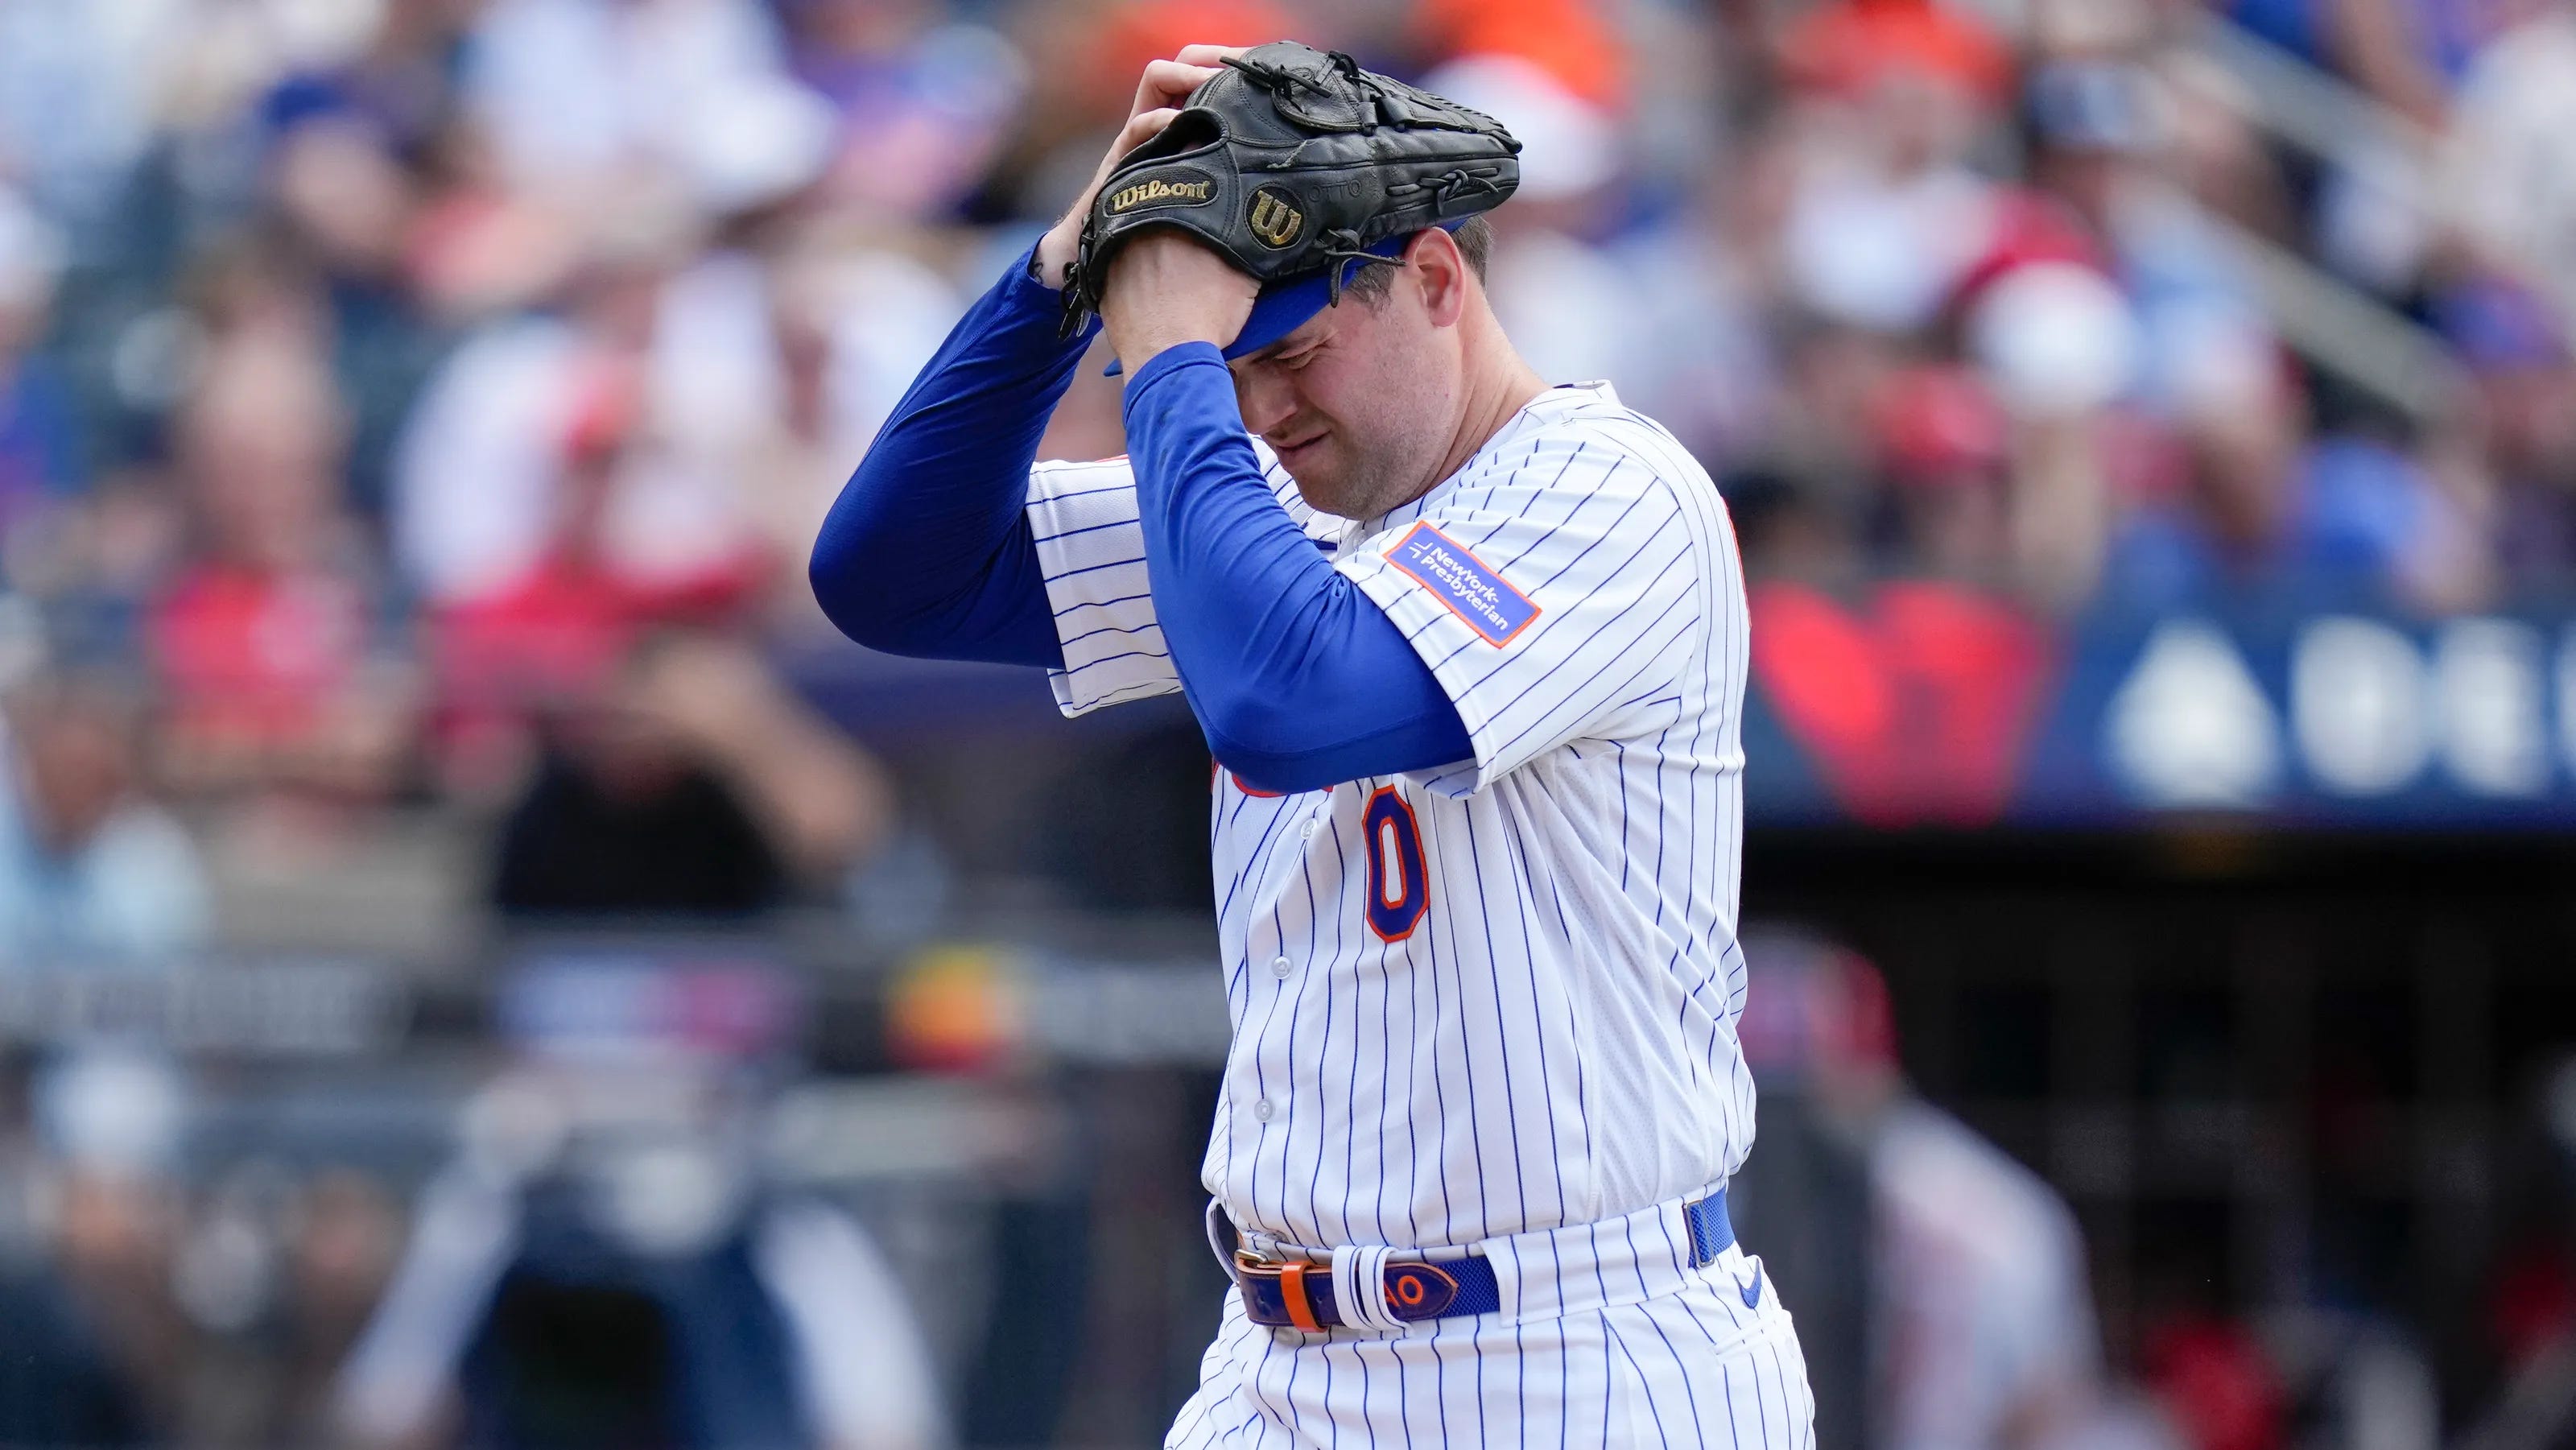 Mets drop from 1st, lose 6-3 to Marlins despite Alonso HR